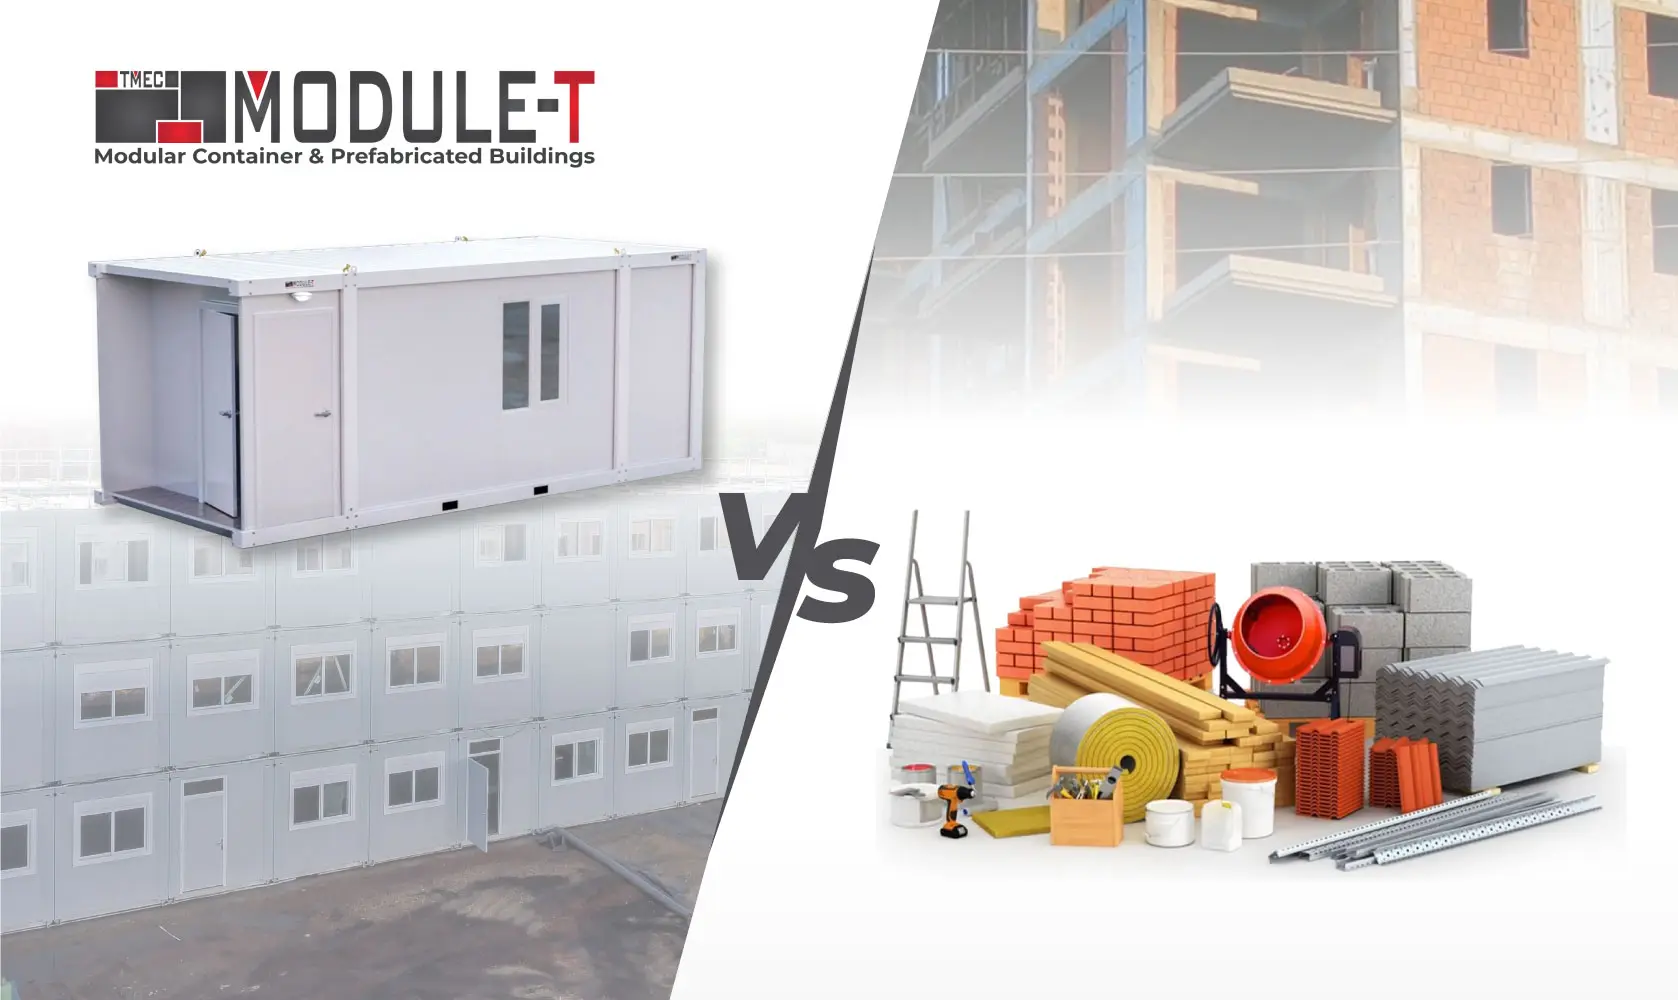 Is It Better Settled Building or Modular Building